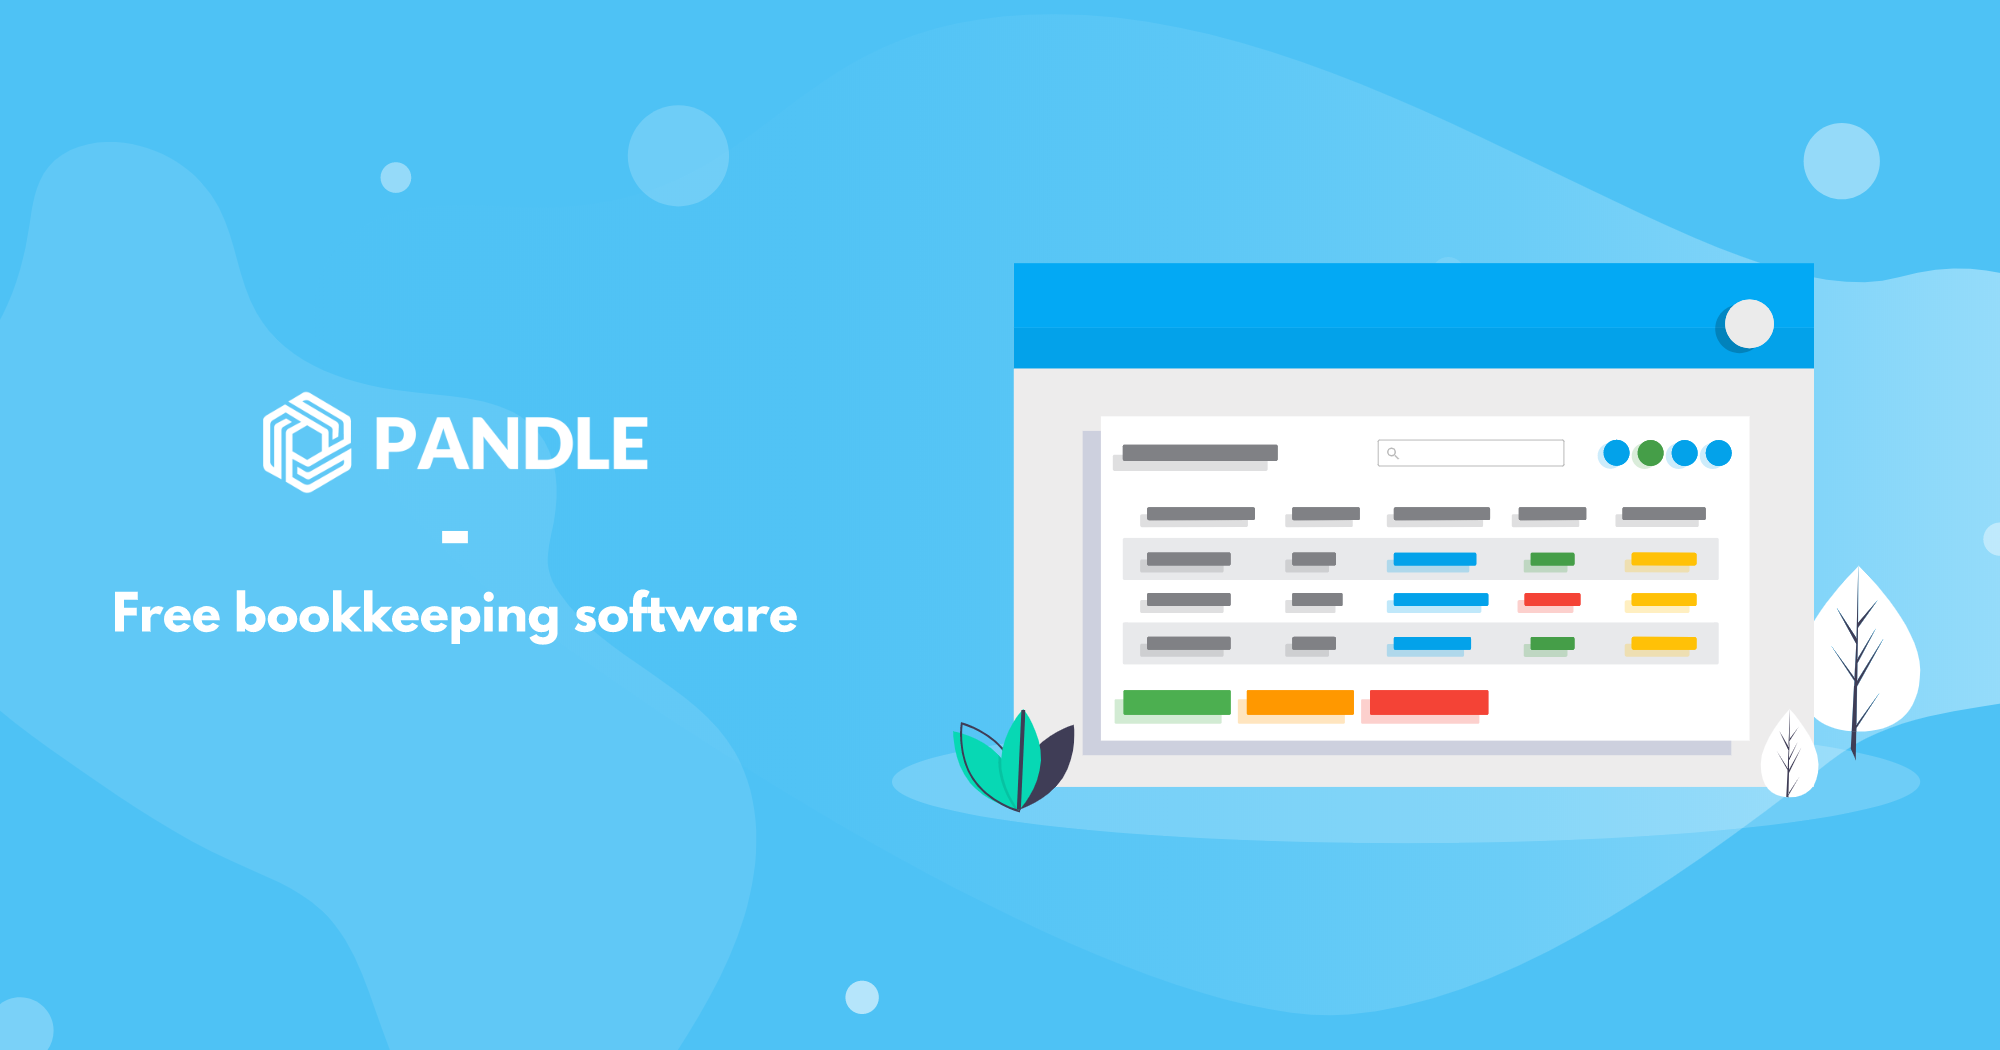 Pandle Free Bookkeeping Software for businesses just like yours.